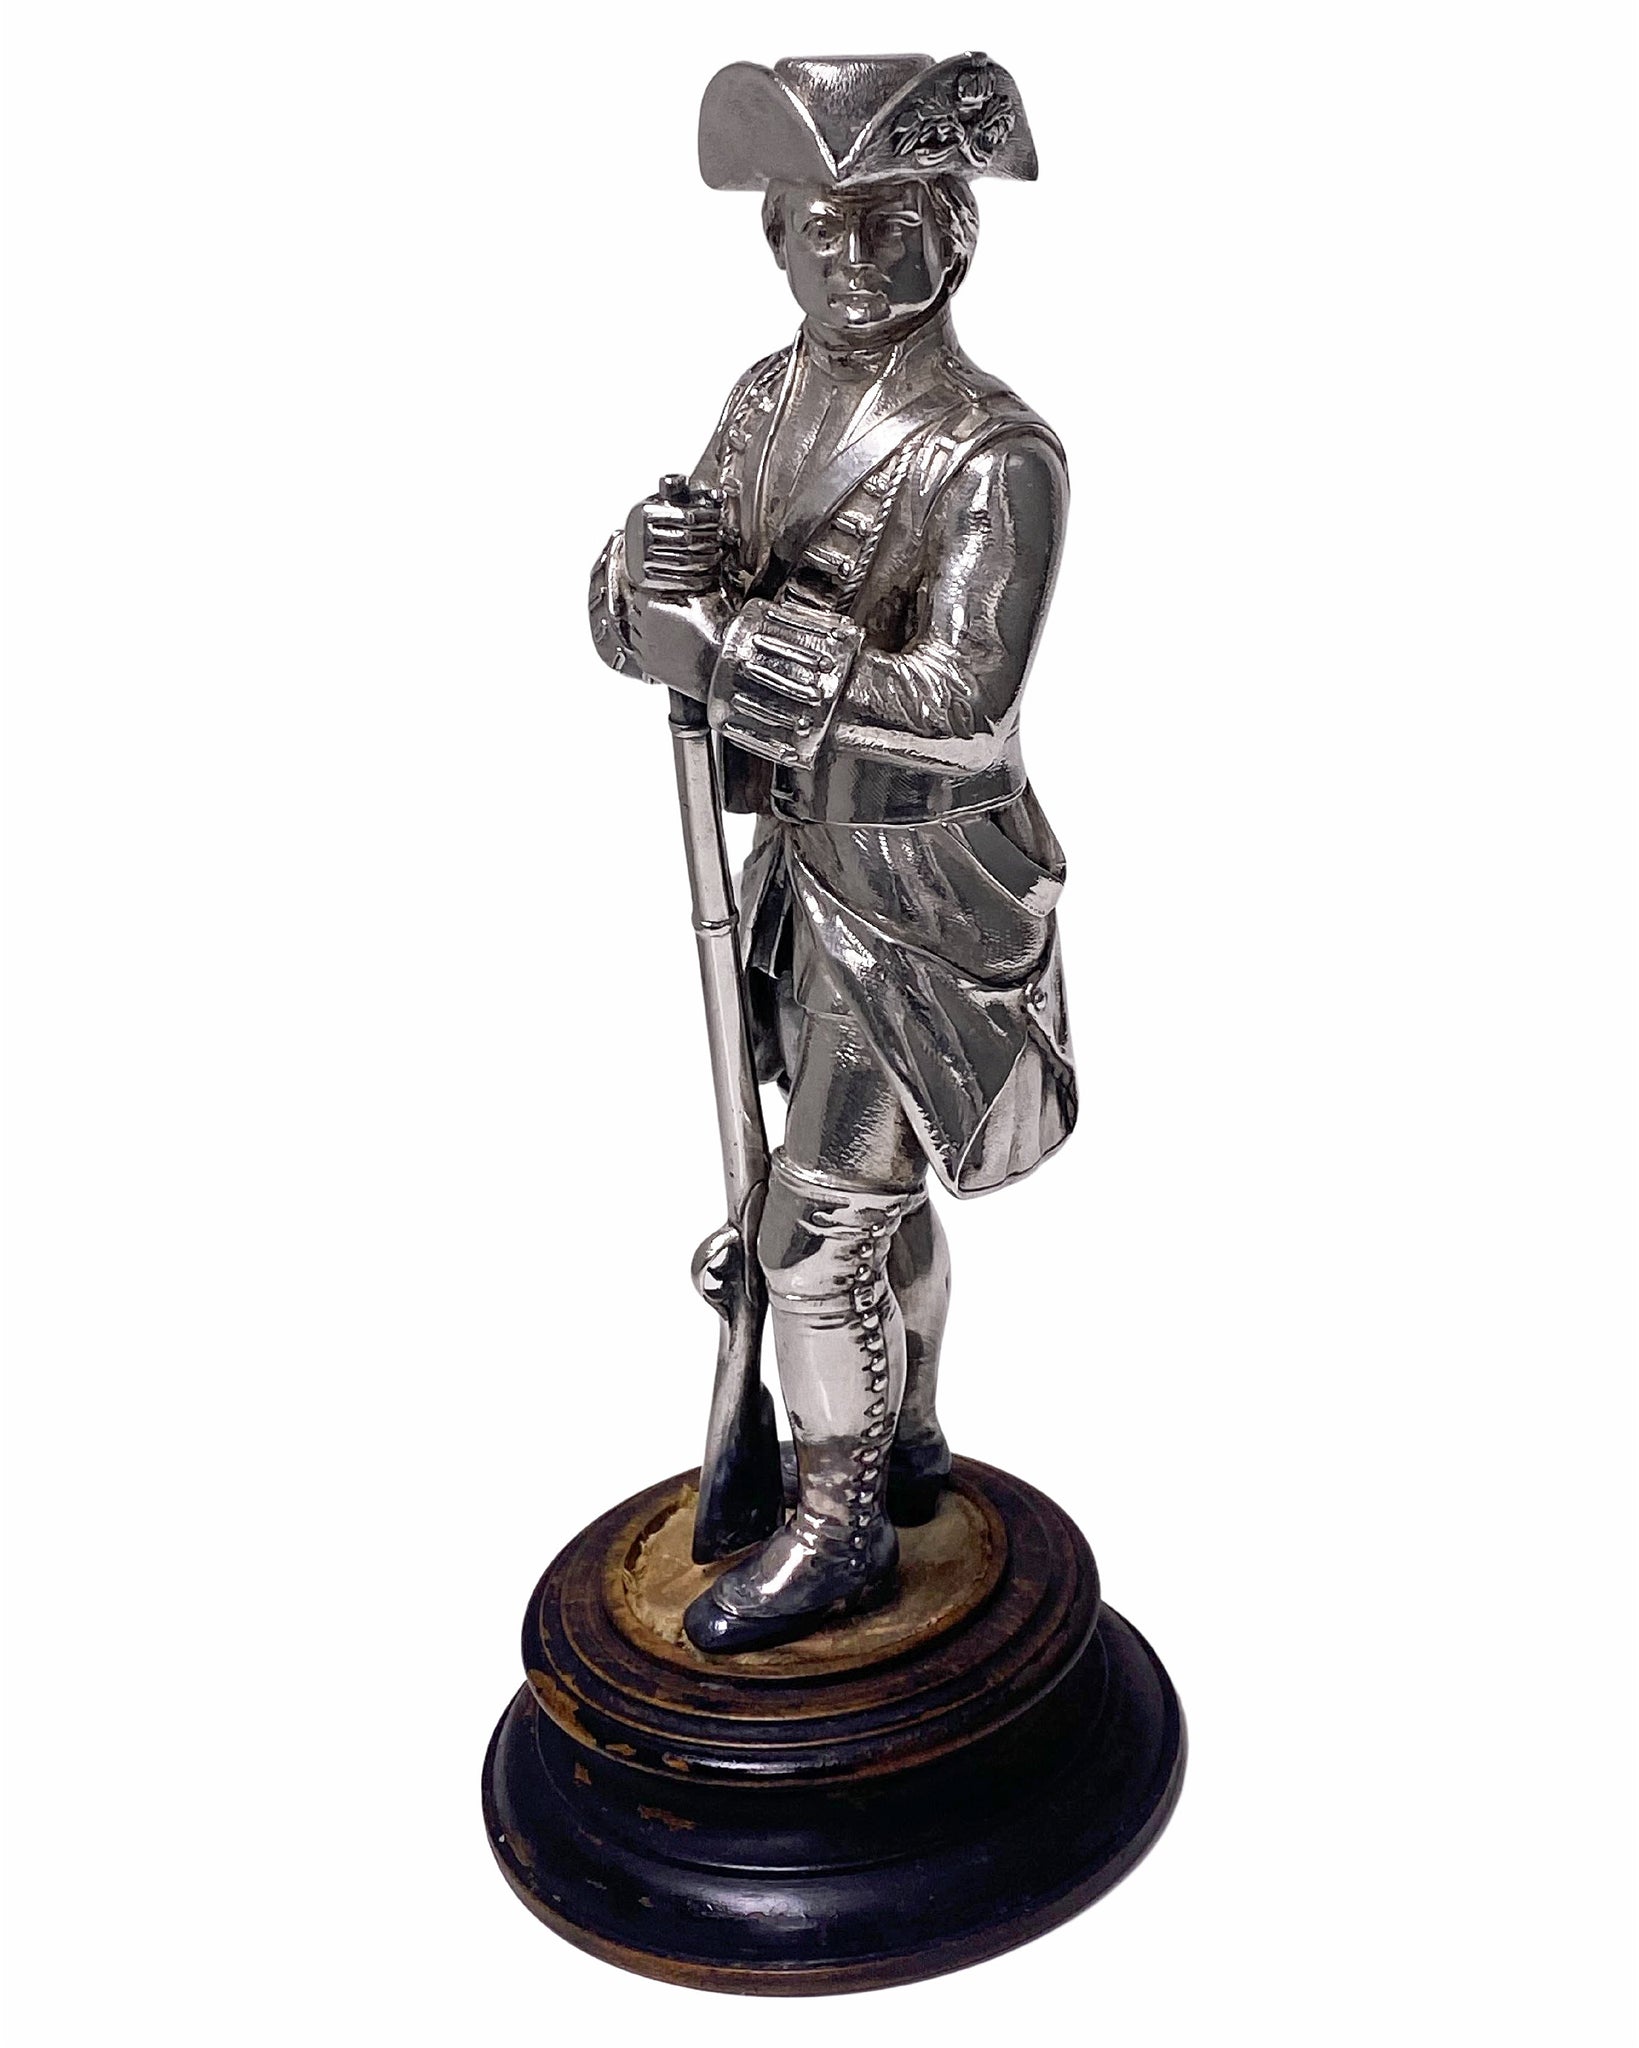 Antique Silver military figure London 1882 George Angell